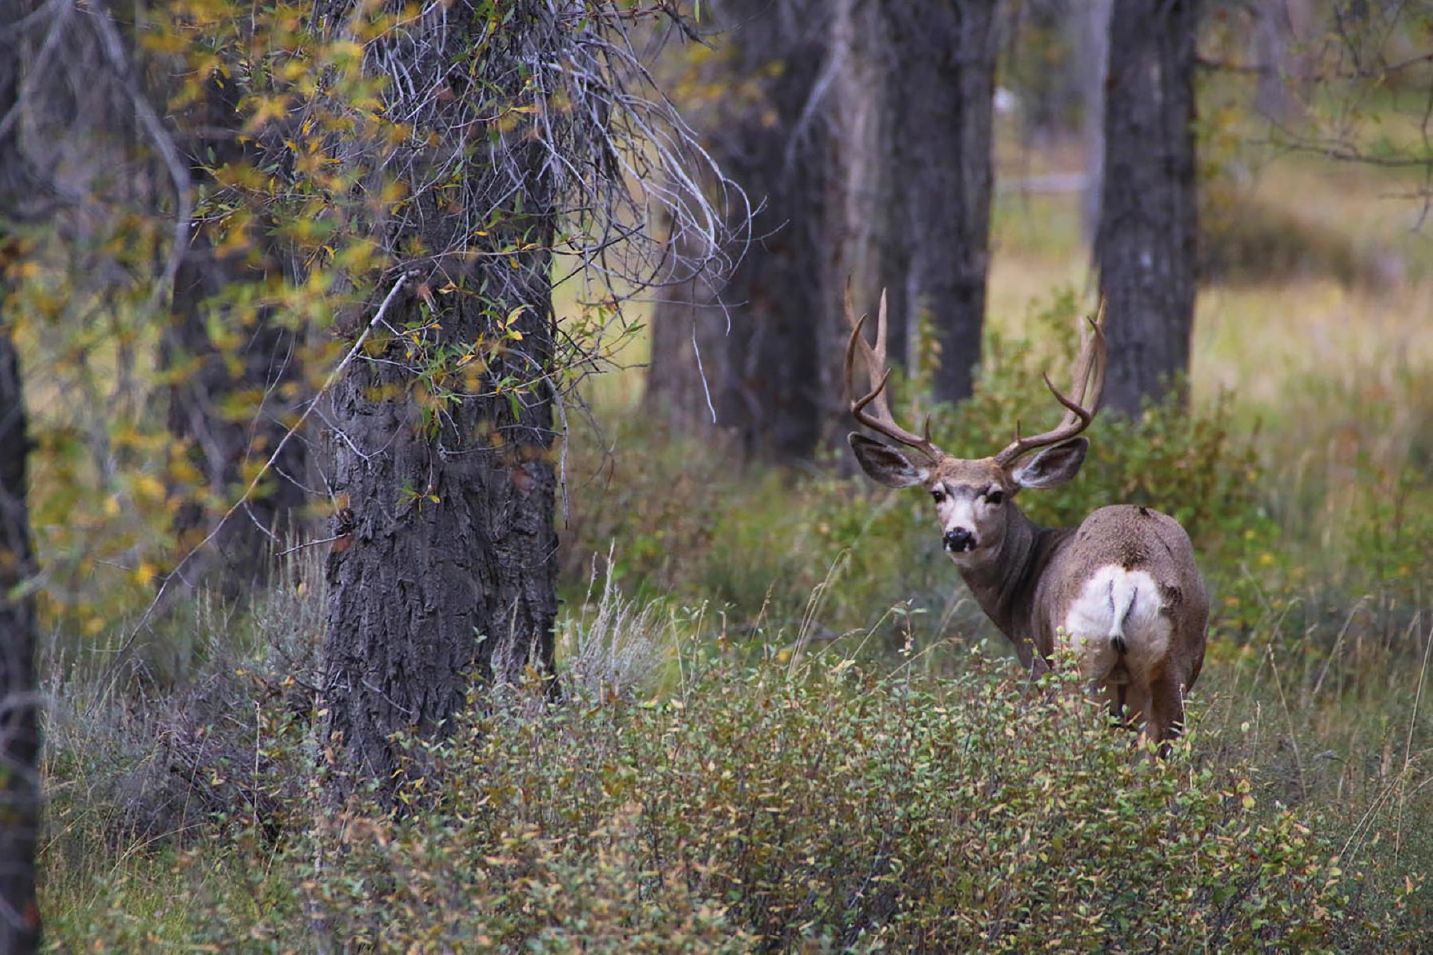 Figure 3. Mule deer looking back to the photograph’s forefield amidst trees and brush.